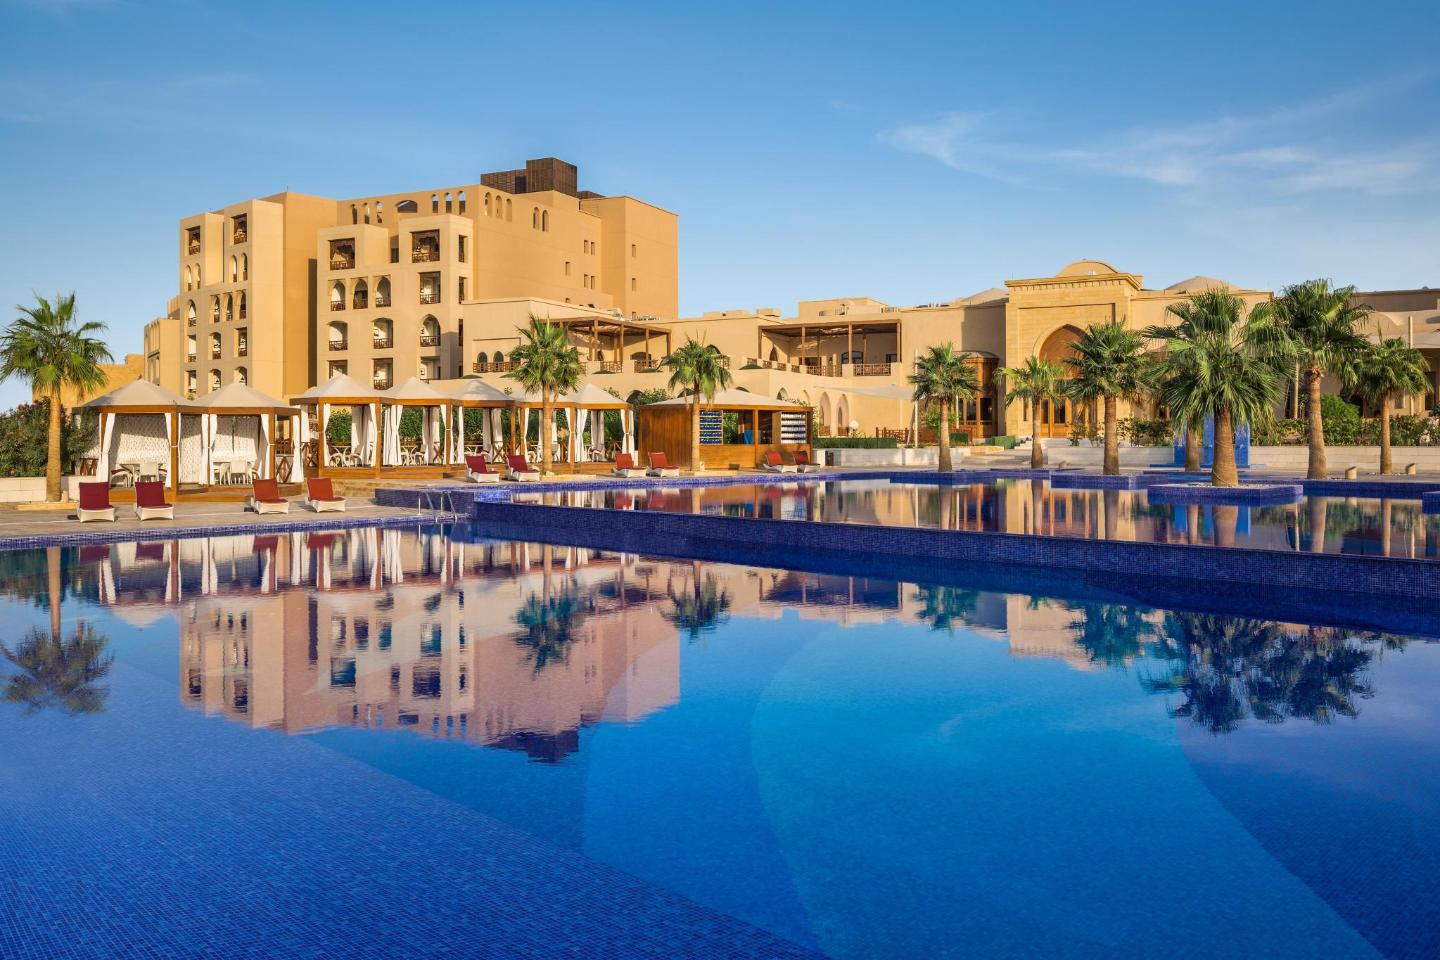 What are the best Resorts hotels in Riyadh?